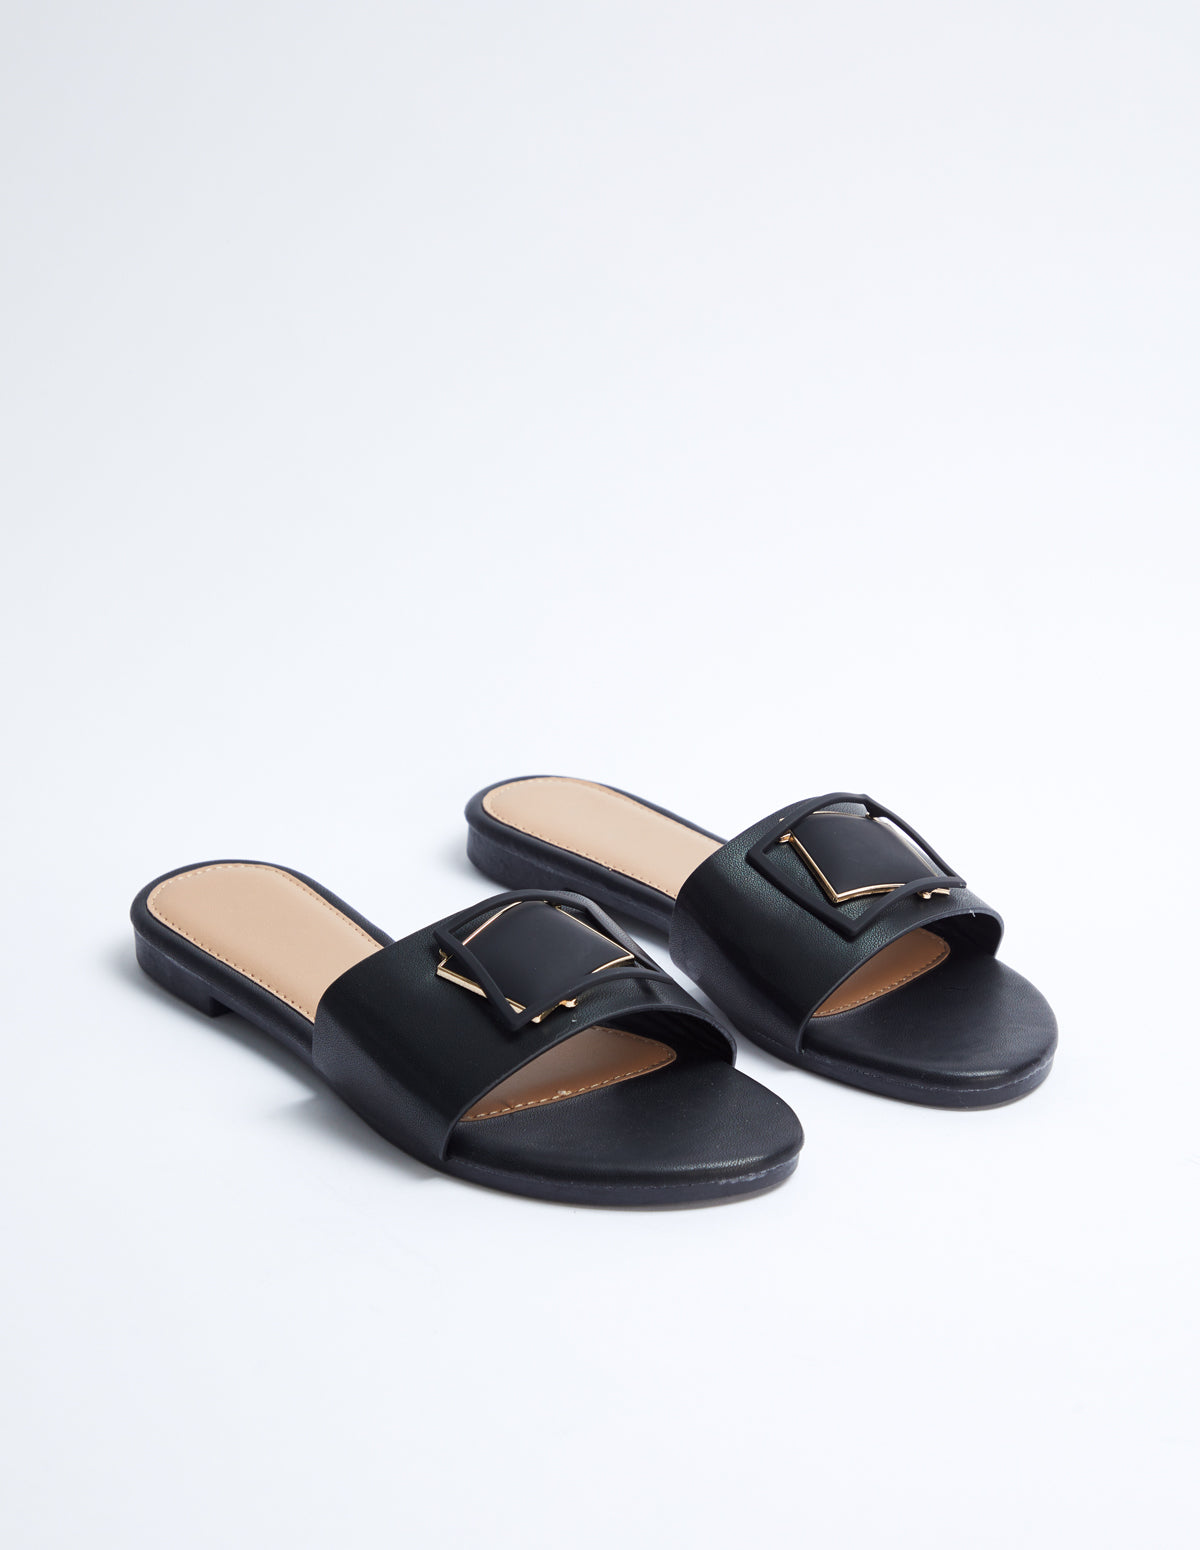 Wide Strap Sandals - May